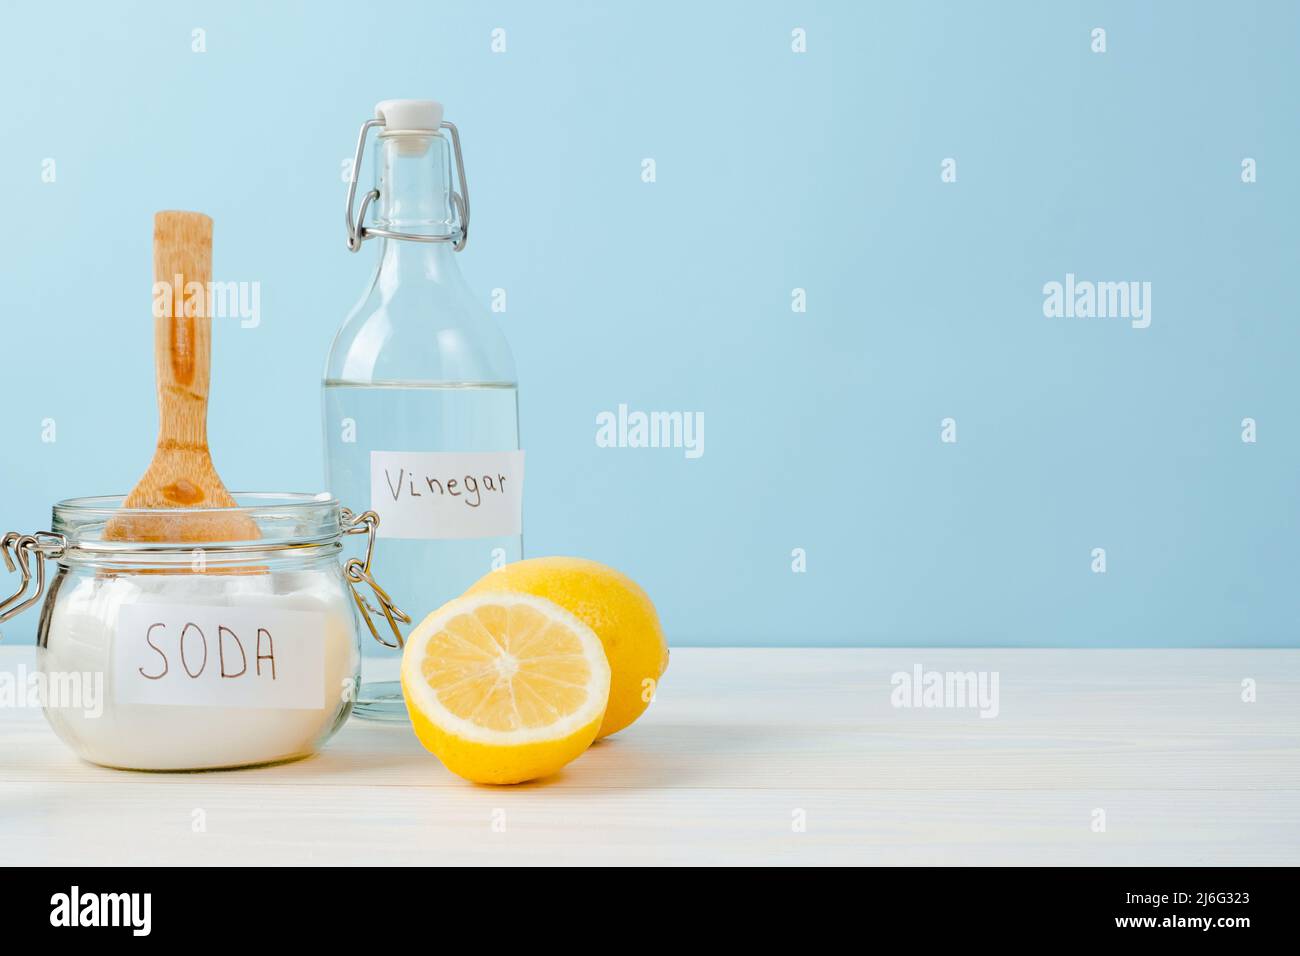 Open jar of baking soda with a wooden spoon on top, vinegar, cut lemon, on a blue background. The concept of organic removing stains on clothes. Stock Photo